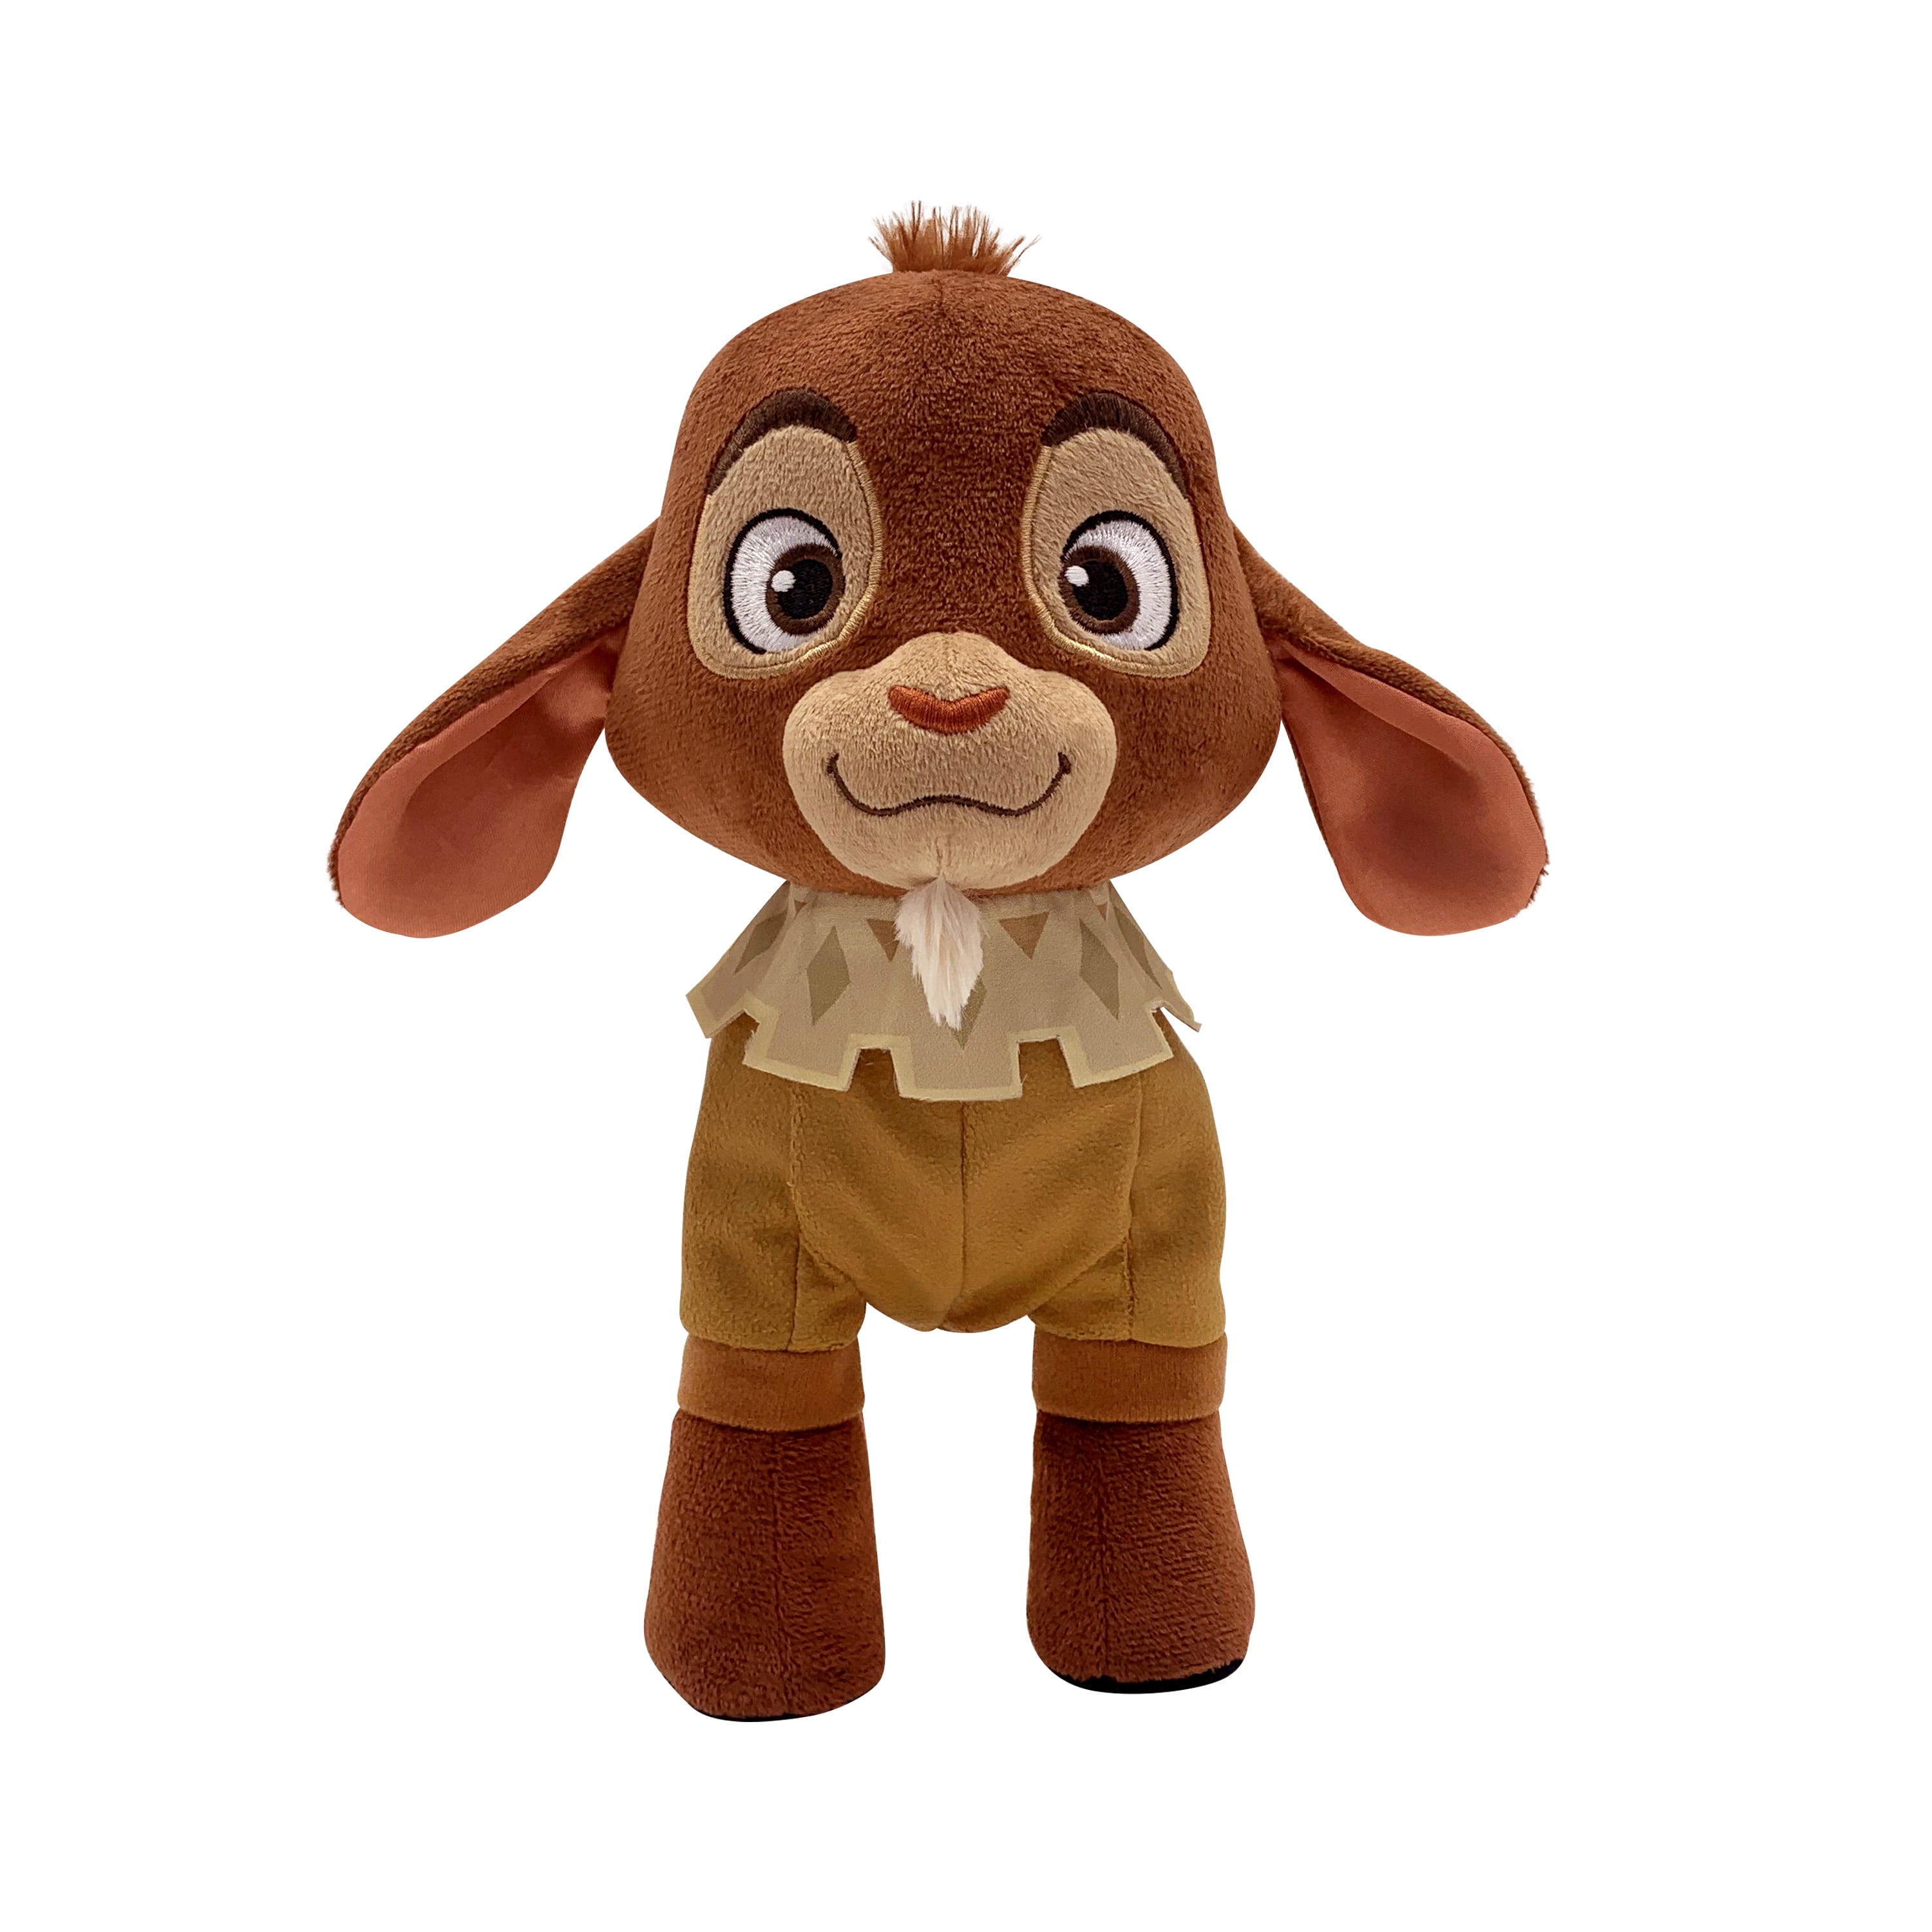 Emotional Support Hornless Goat Plush Stuffed Animal Personalized Gift Toy  